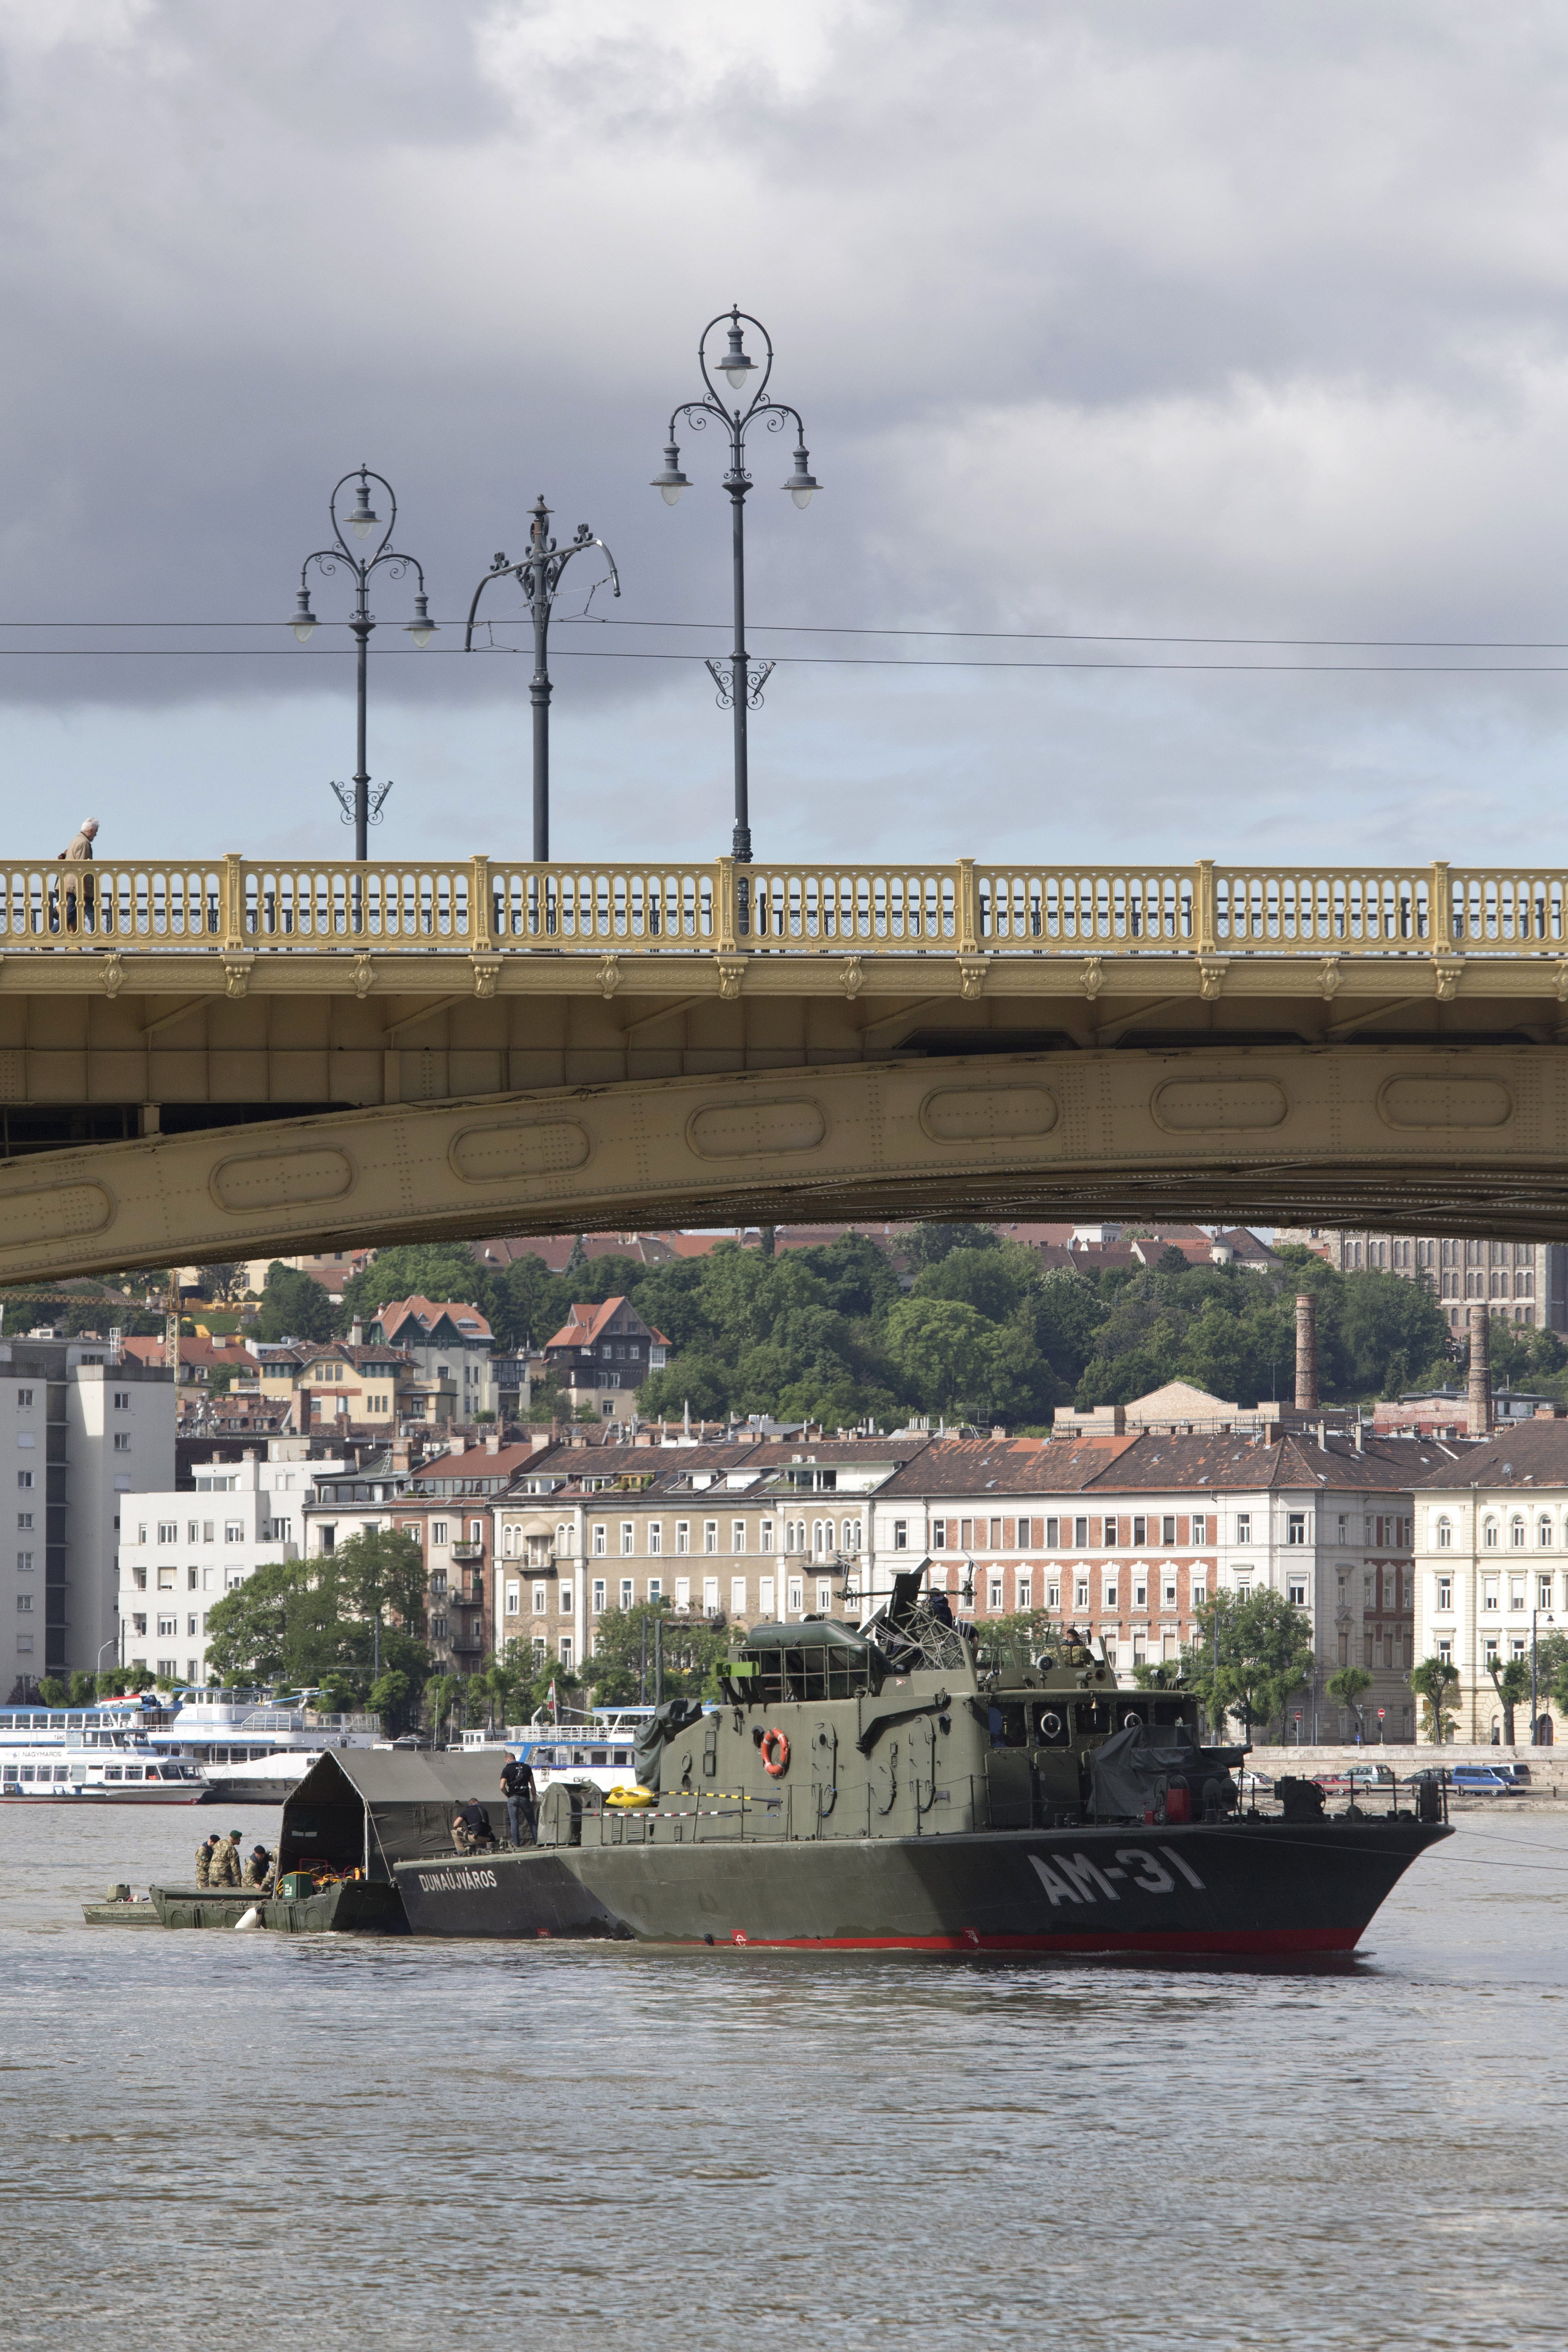 Rescue crew members are seen at work on the Danube River underneath the Margit Bridge where a sightseeing boat capsized in Budapest, Hungary, Friday, May 31, 2019. Hungarian police have detained the captain of a cruise ship that collided with the sightseeing boat packed with South Korean tourists, causing it to sink quickly in the river as loved ones of the missing and dead were expected to arrive Friday in Hungary.